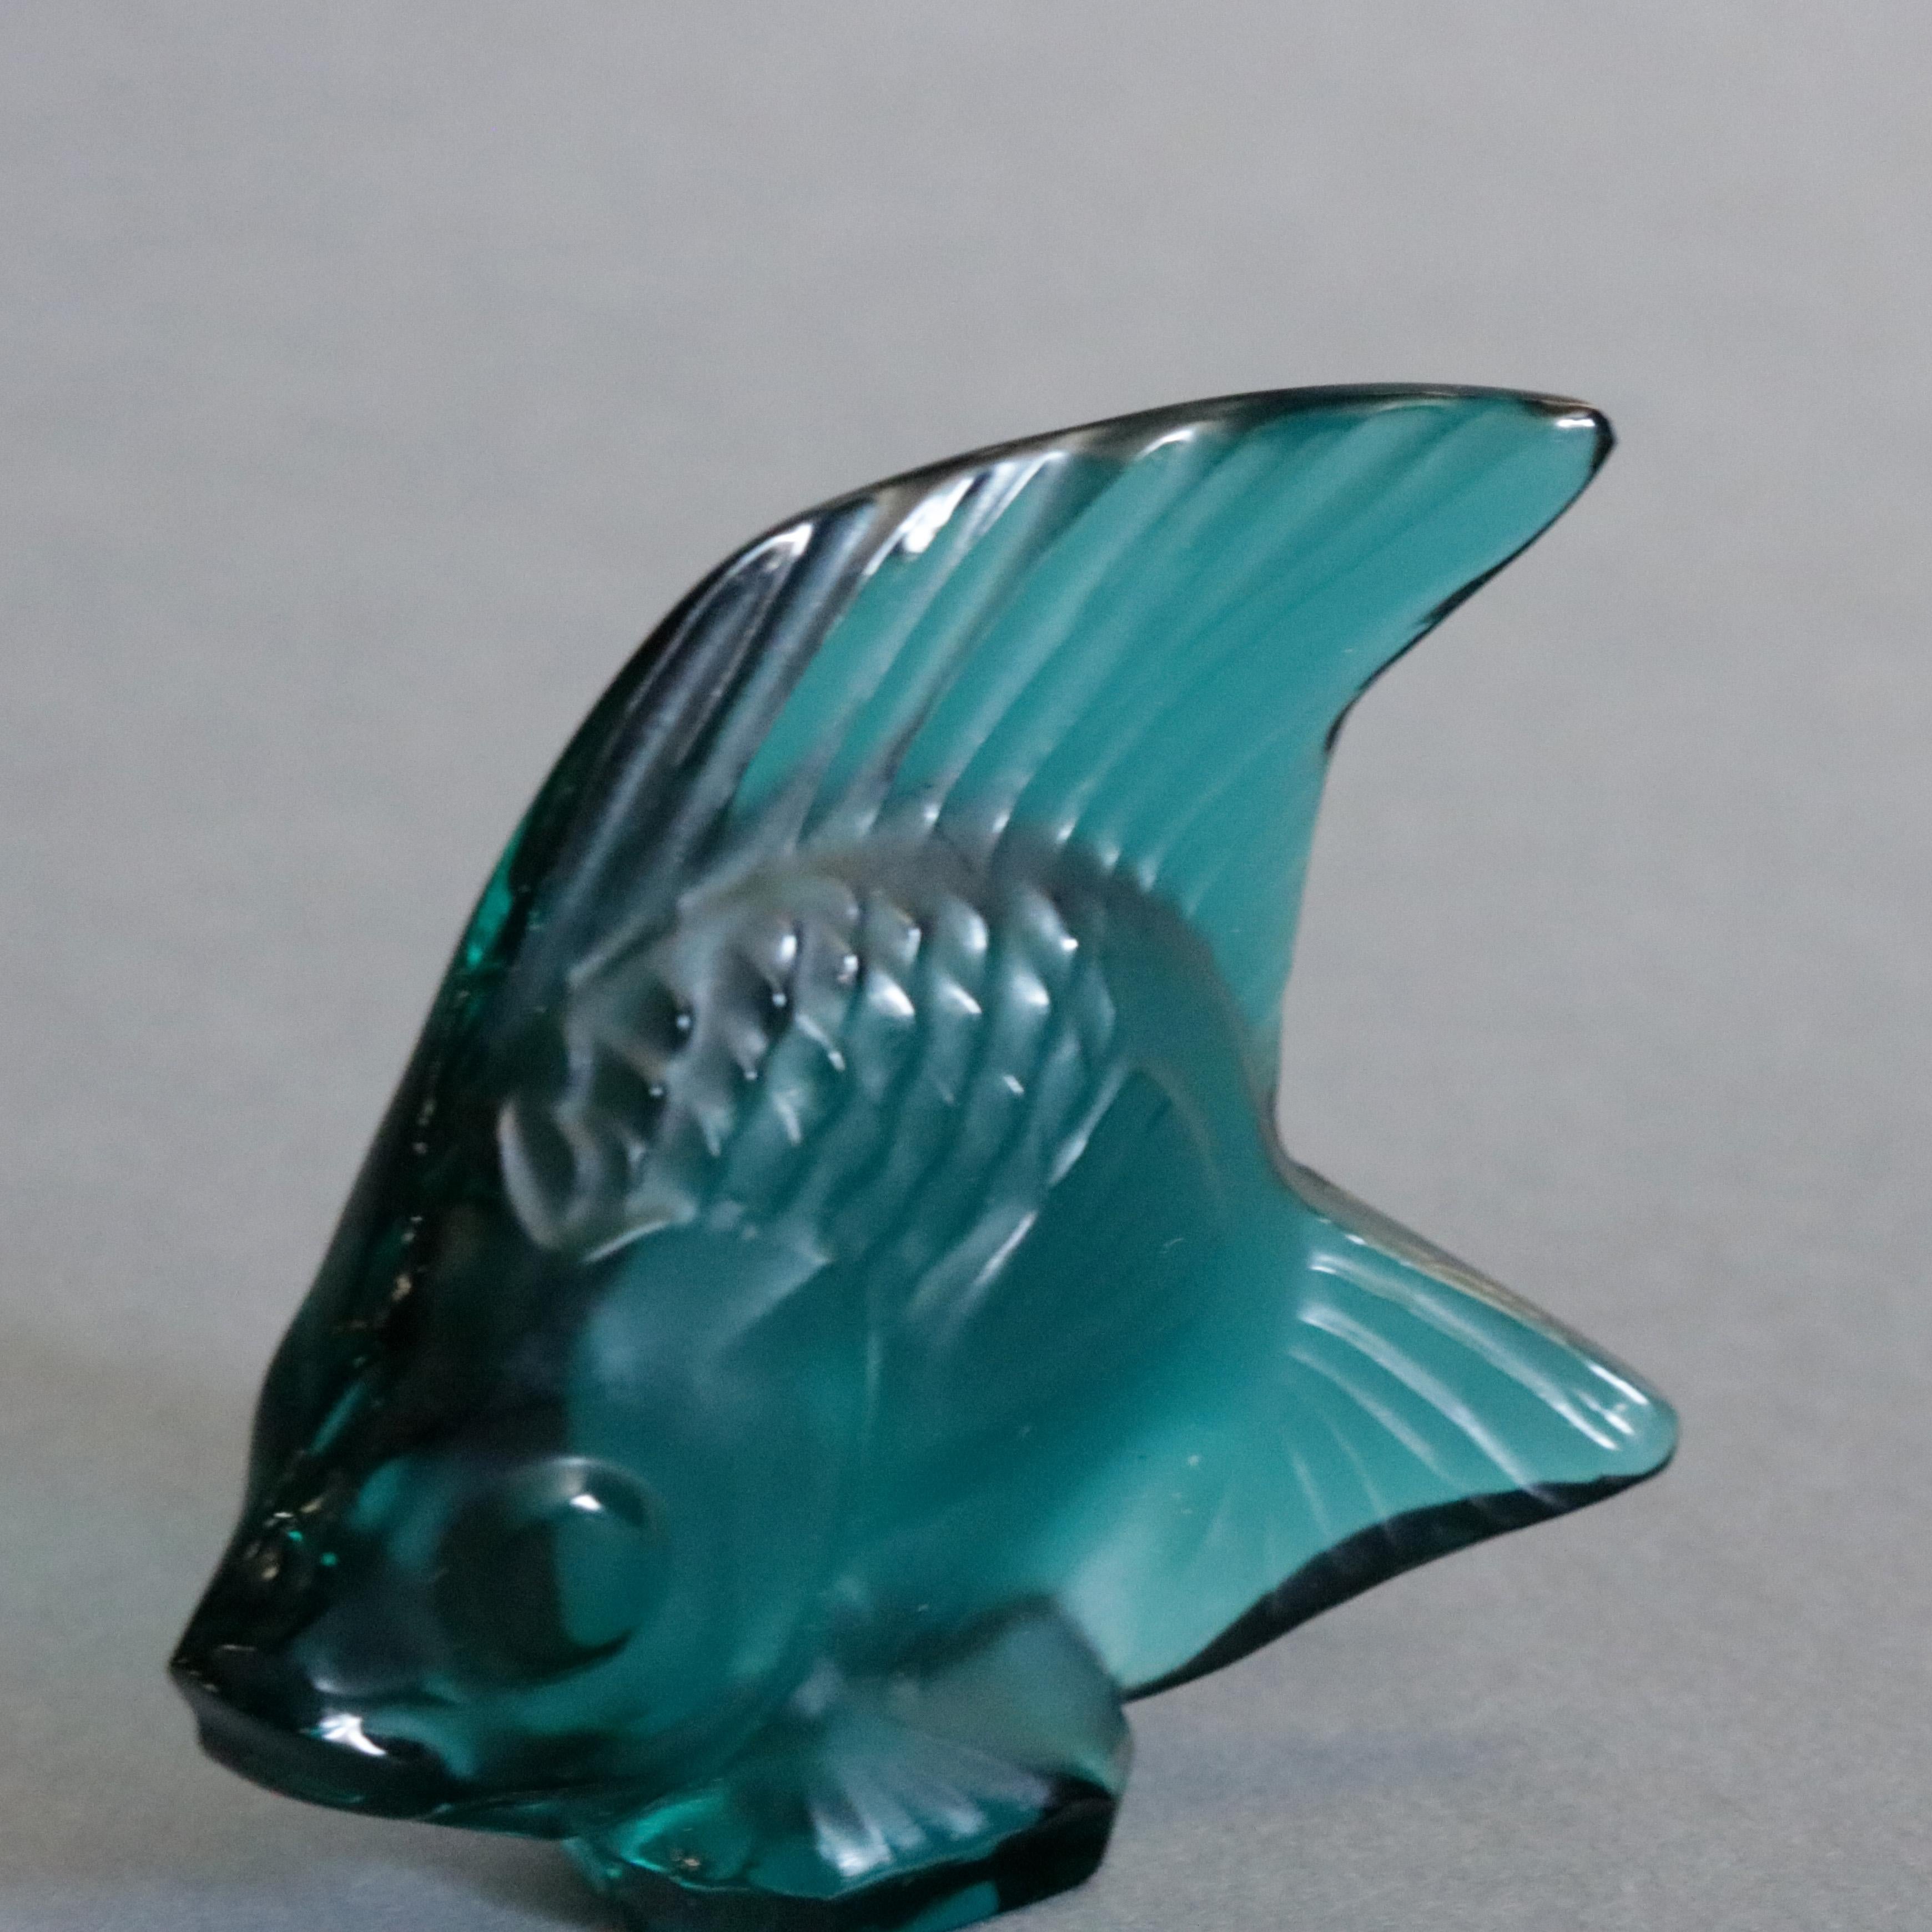 A vintage figural French Lalique art glass sculpture offers an angel fish in teal blue, signed as photographed, 20th century

Measures- 2